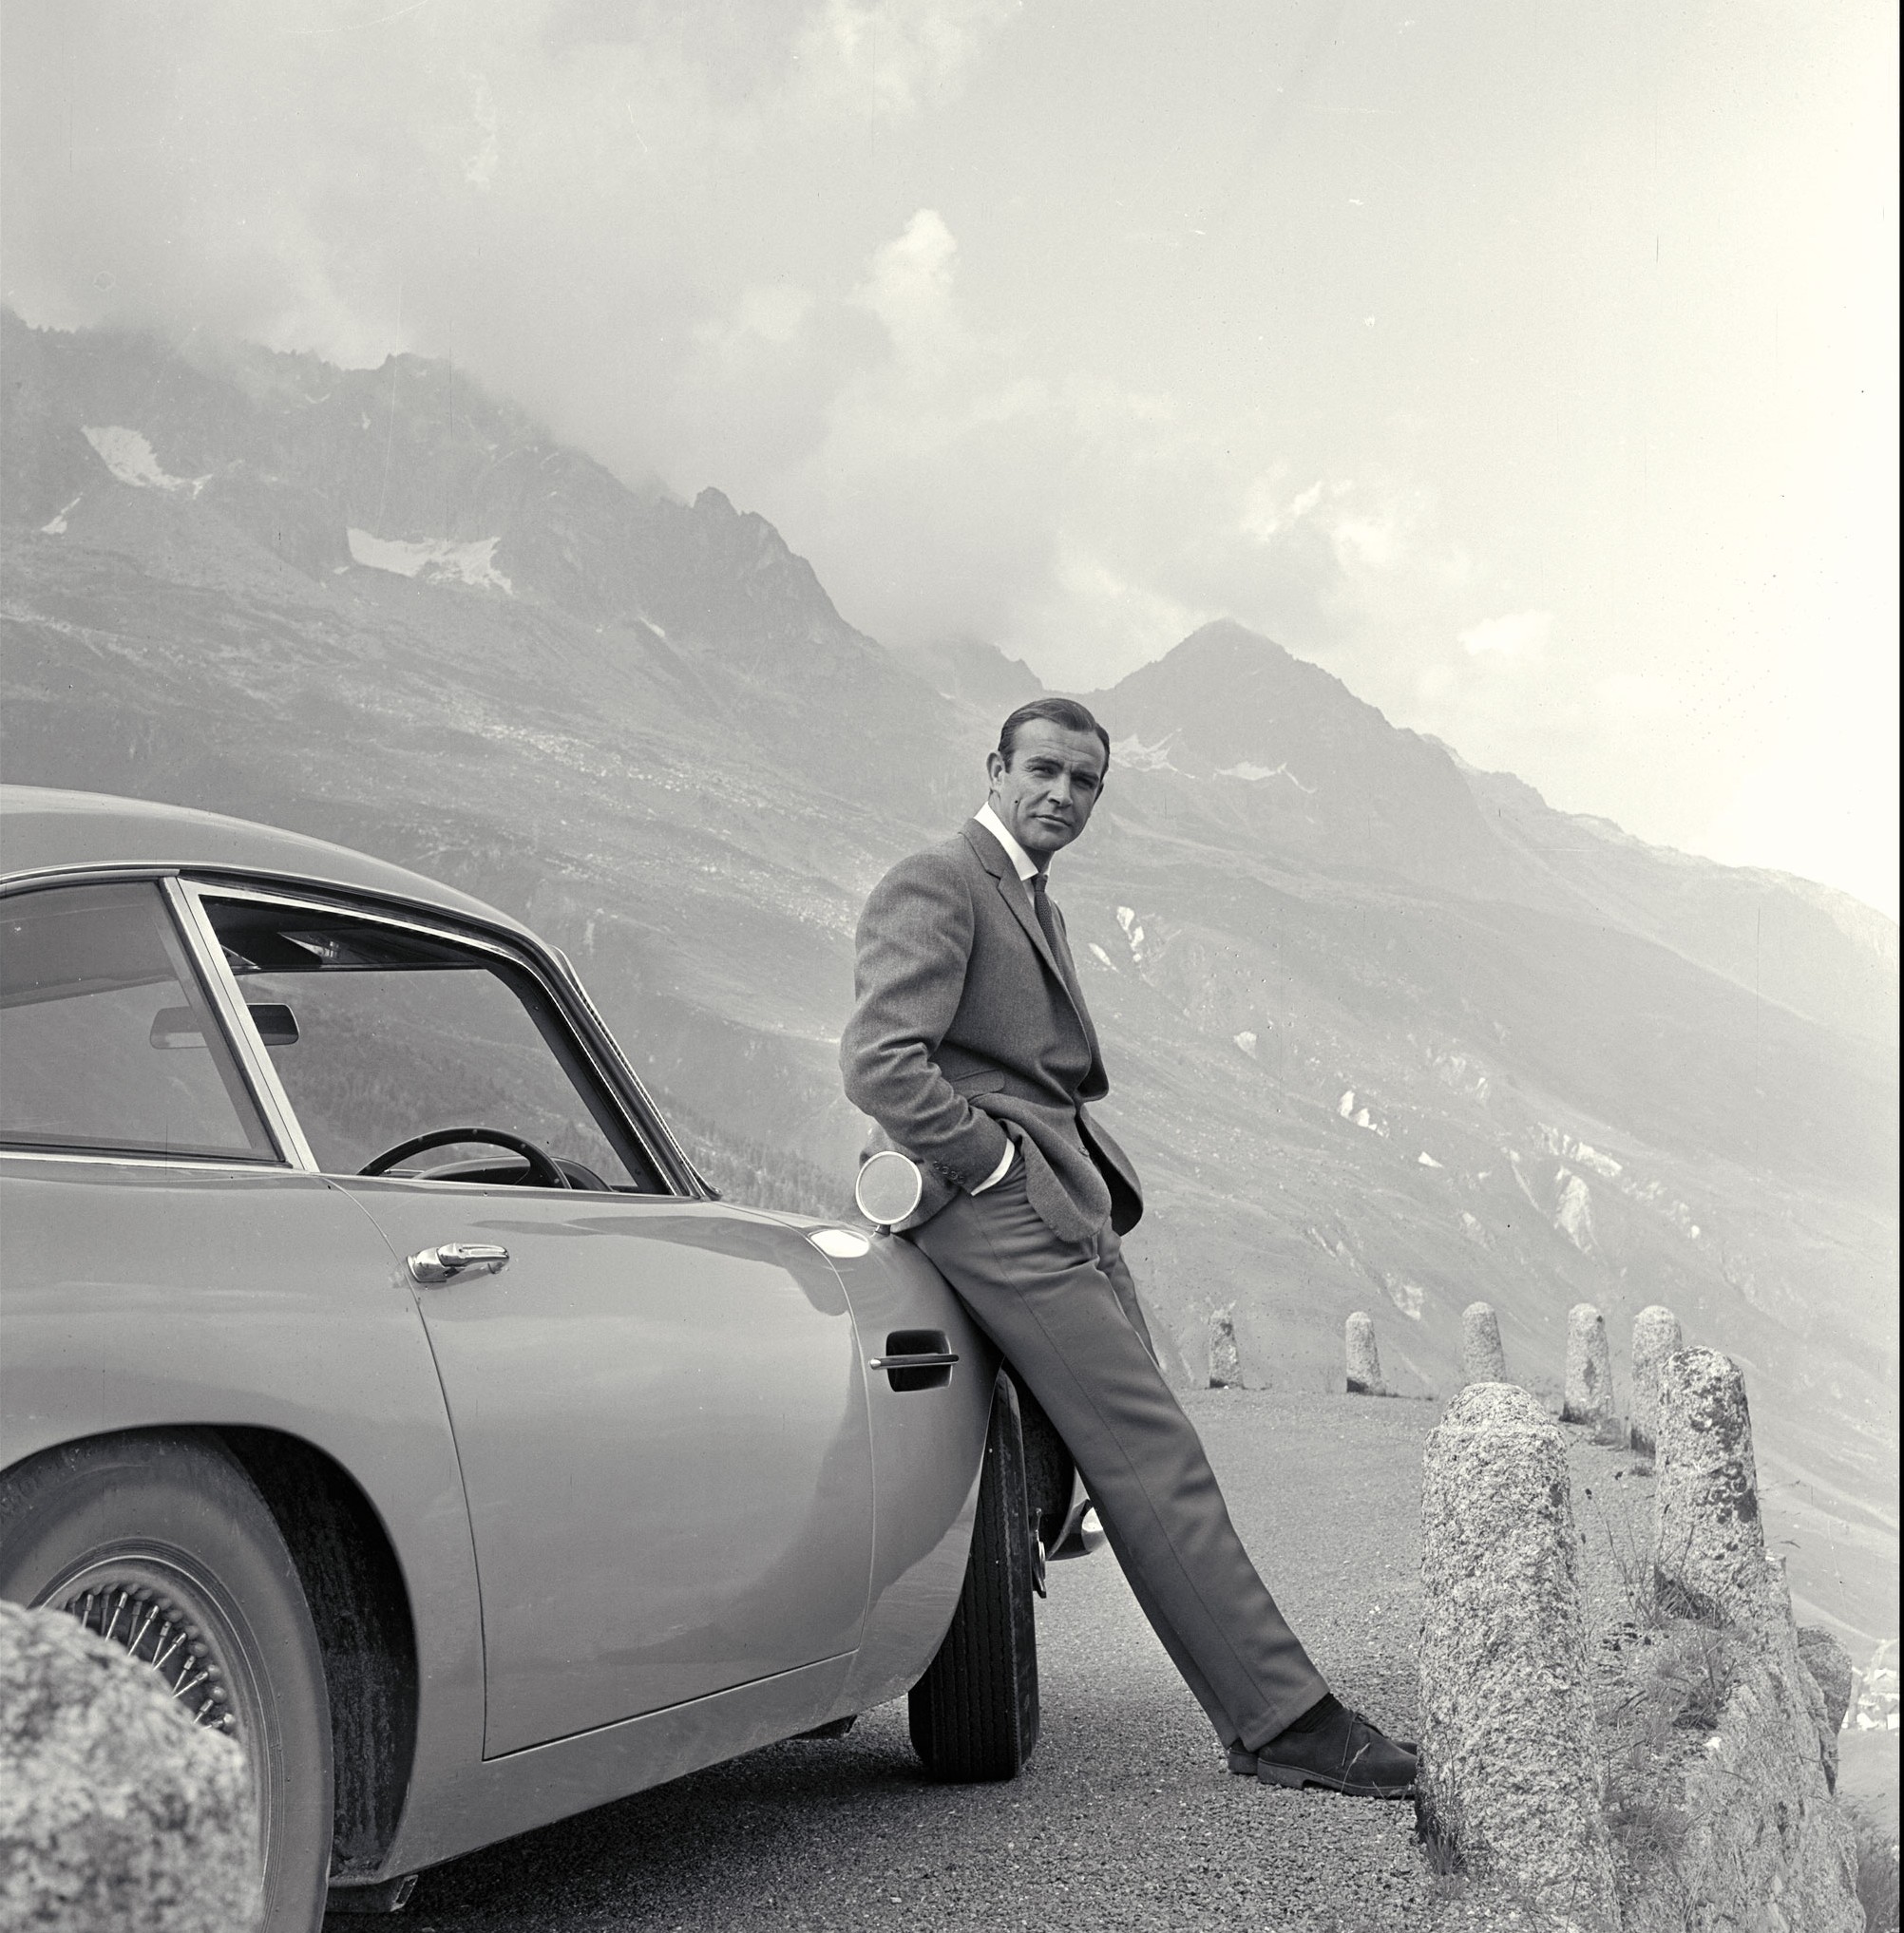 Sean Connery as James Bond, leaning on his car